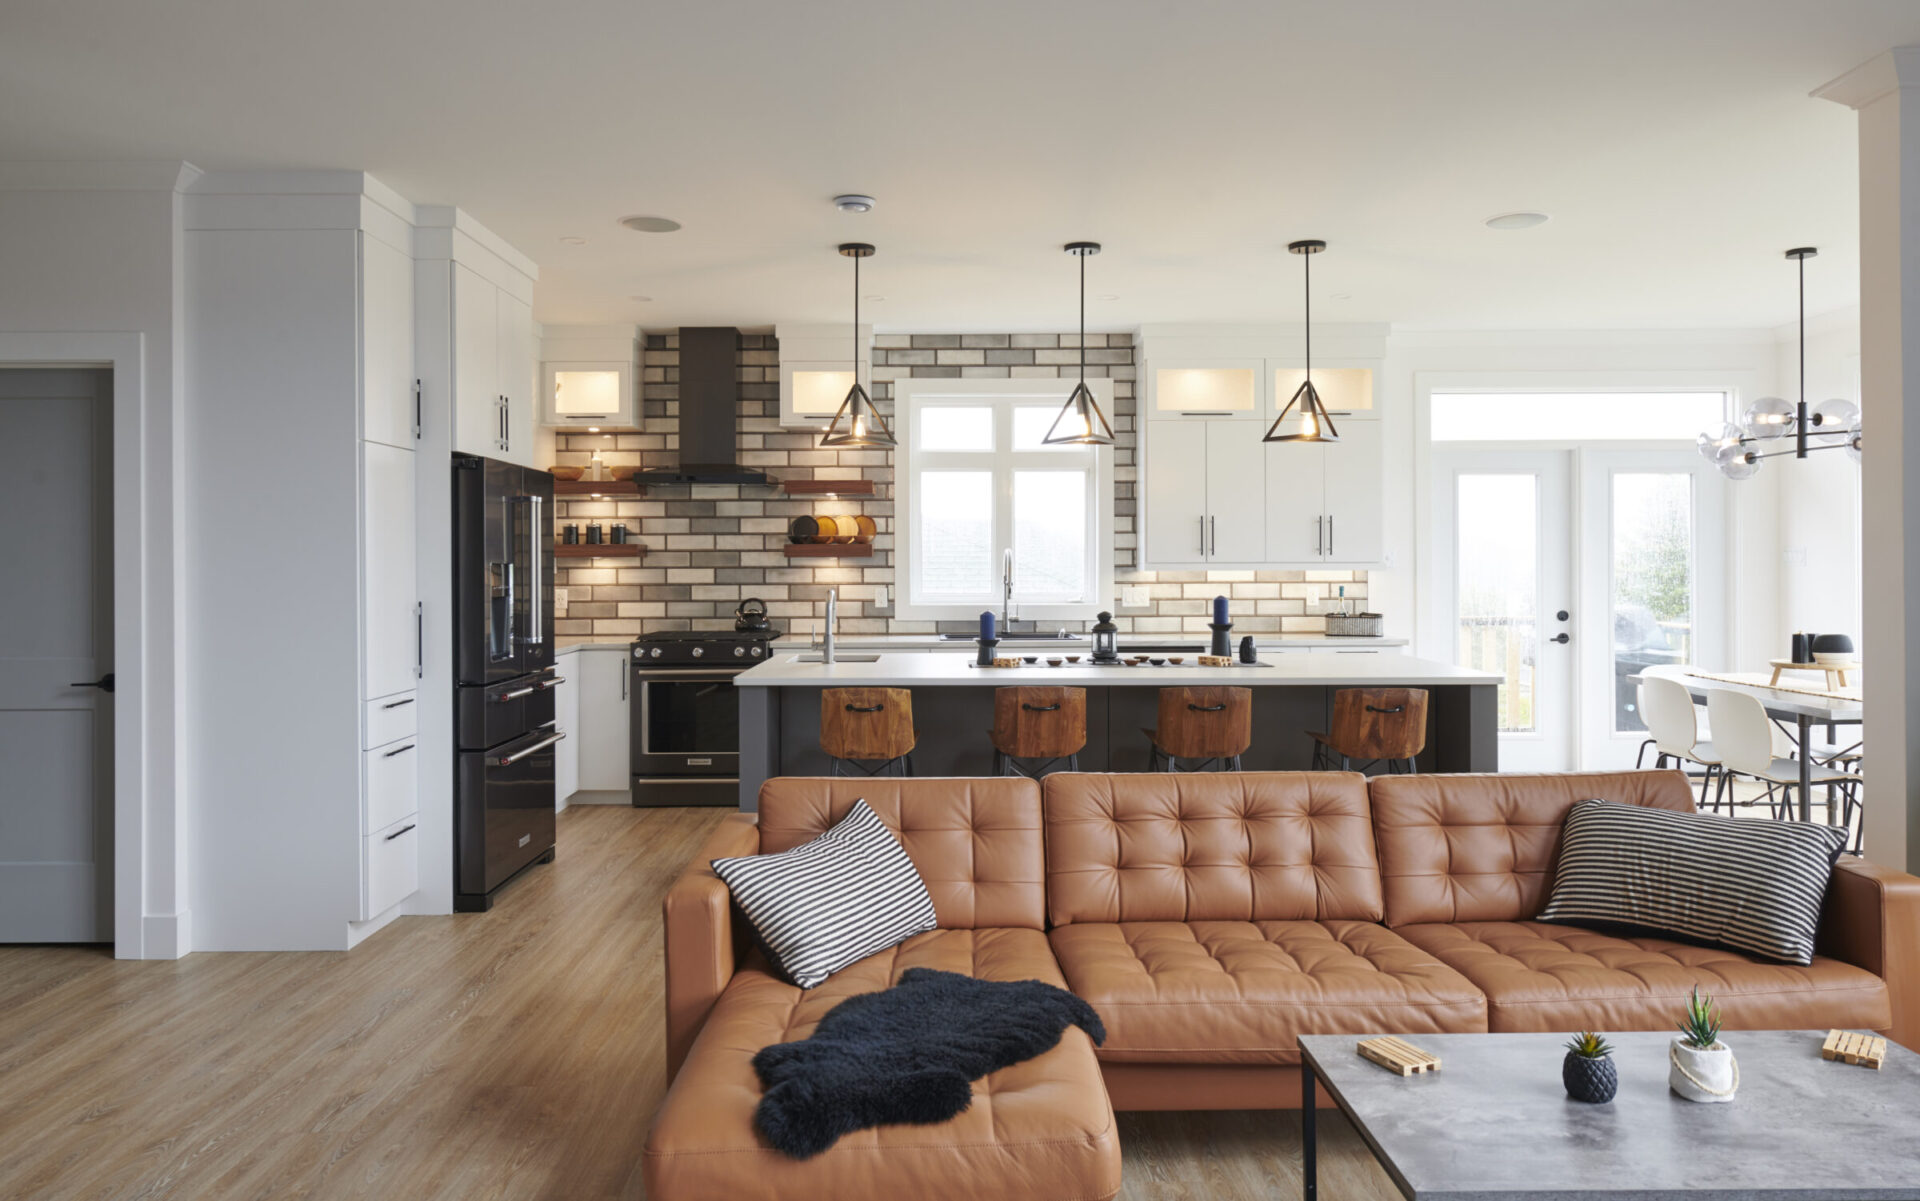 Modern open-plan living space with a kitchen, dining area, and living room. Brown leather couch, wooden stools, elegant pendant lights, and neutral tones.